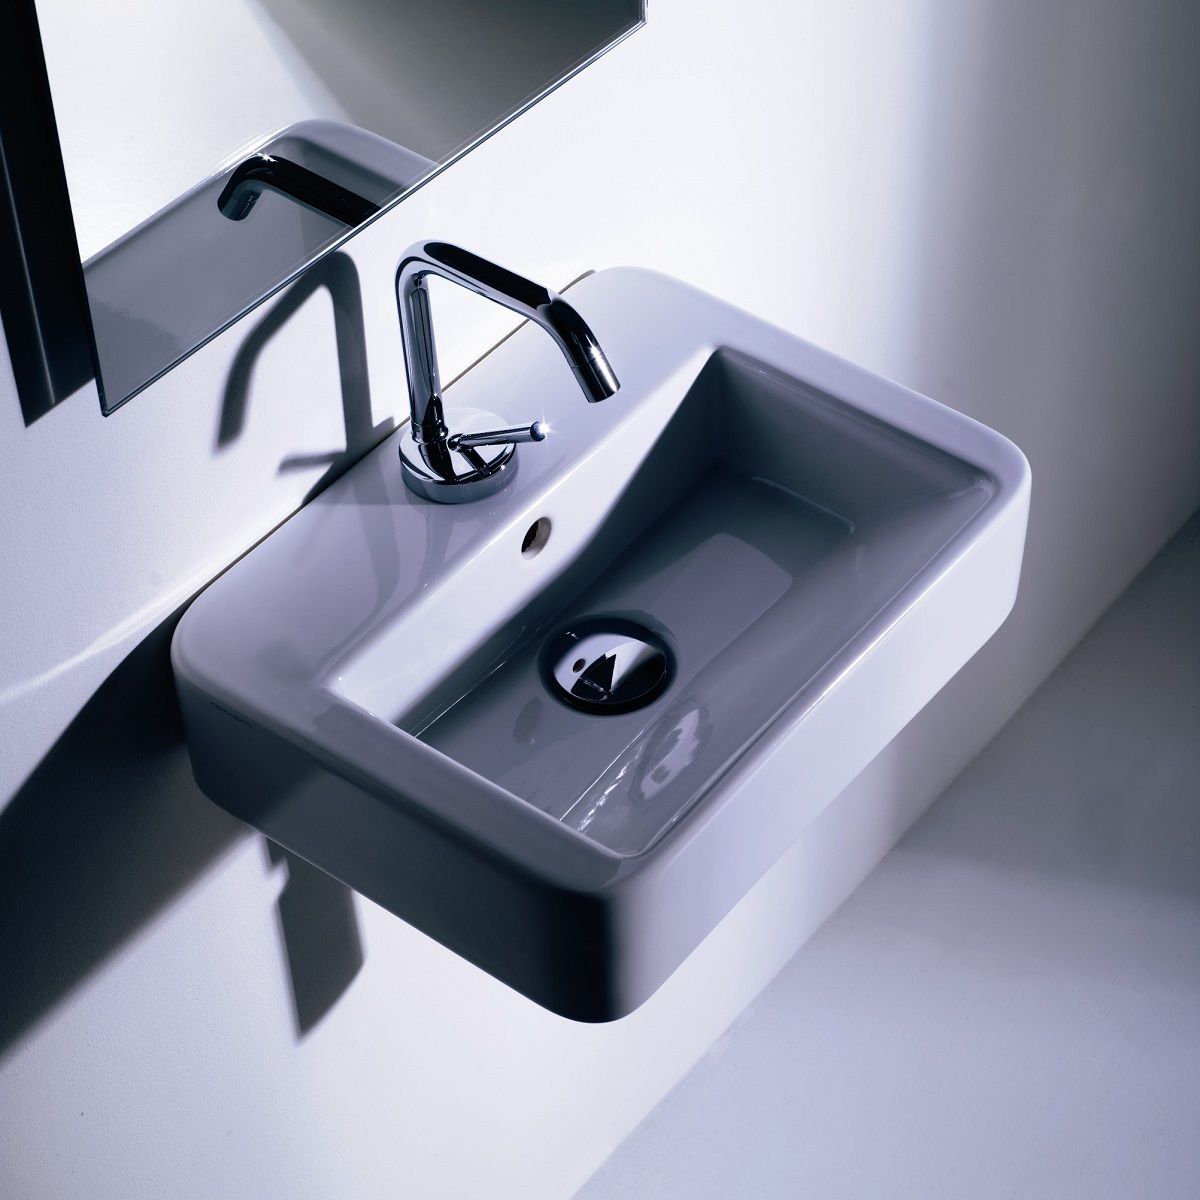 Replace Your Fixtures - Quadro Wall Mounted Sink